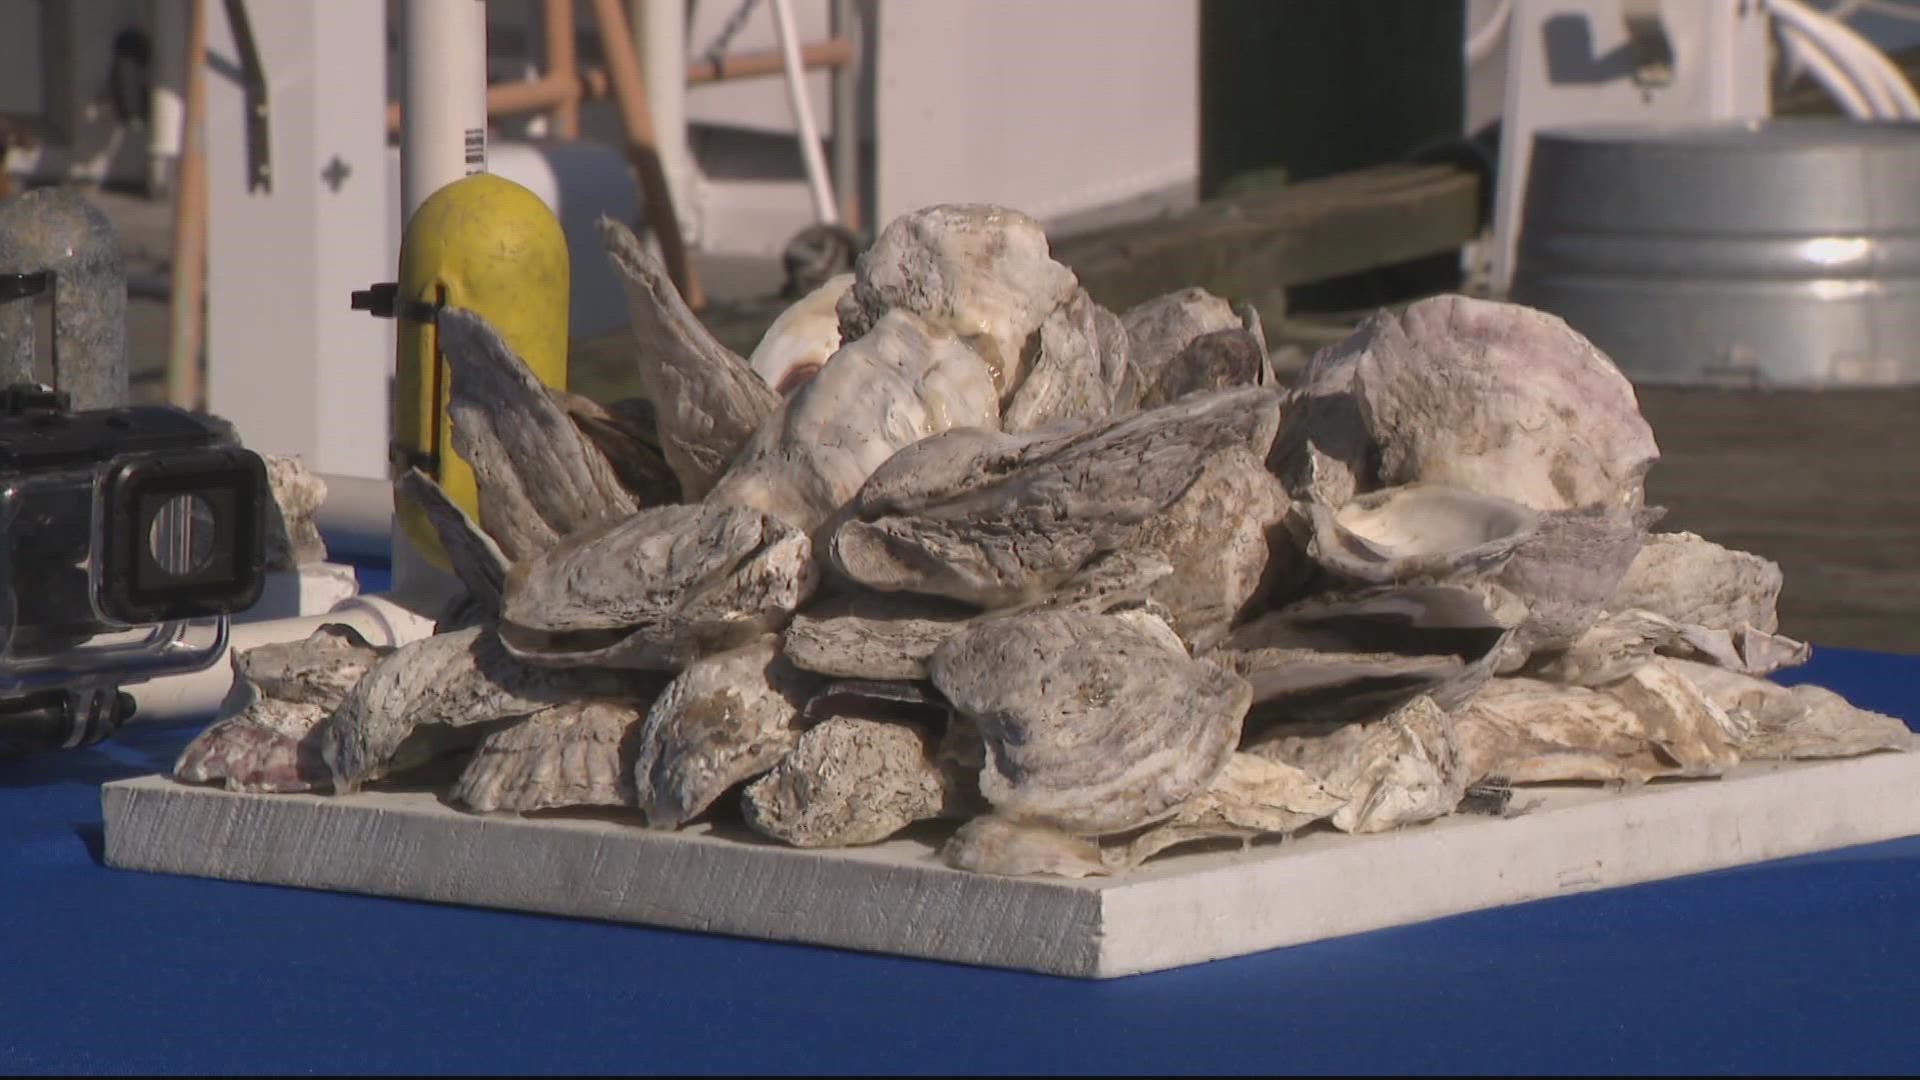 The Smithsonian marked the start of a new oyster restoration partnership with the Chesapeake Bay Foundation.